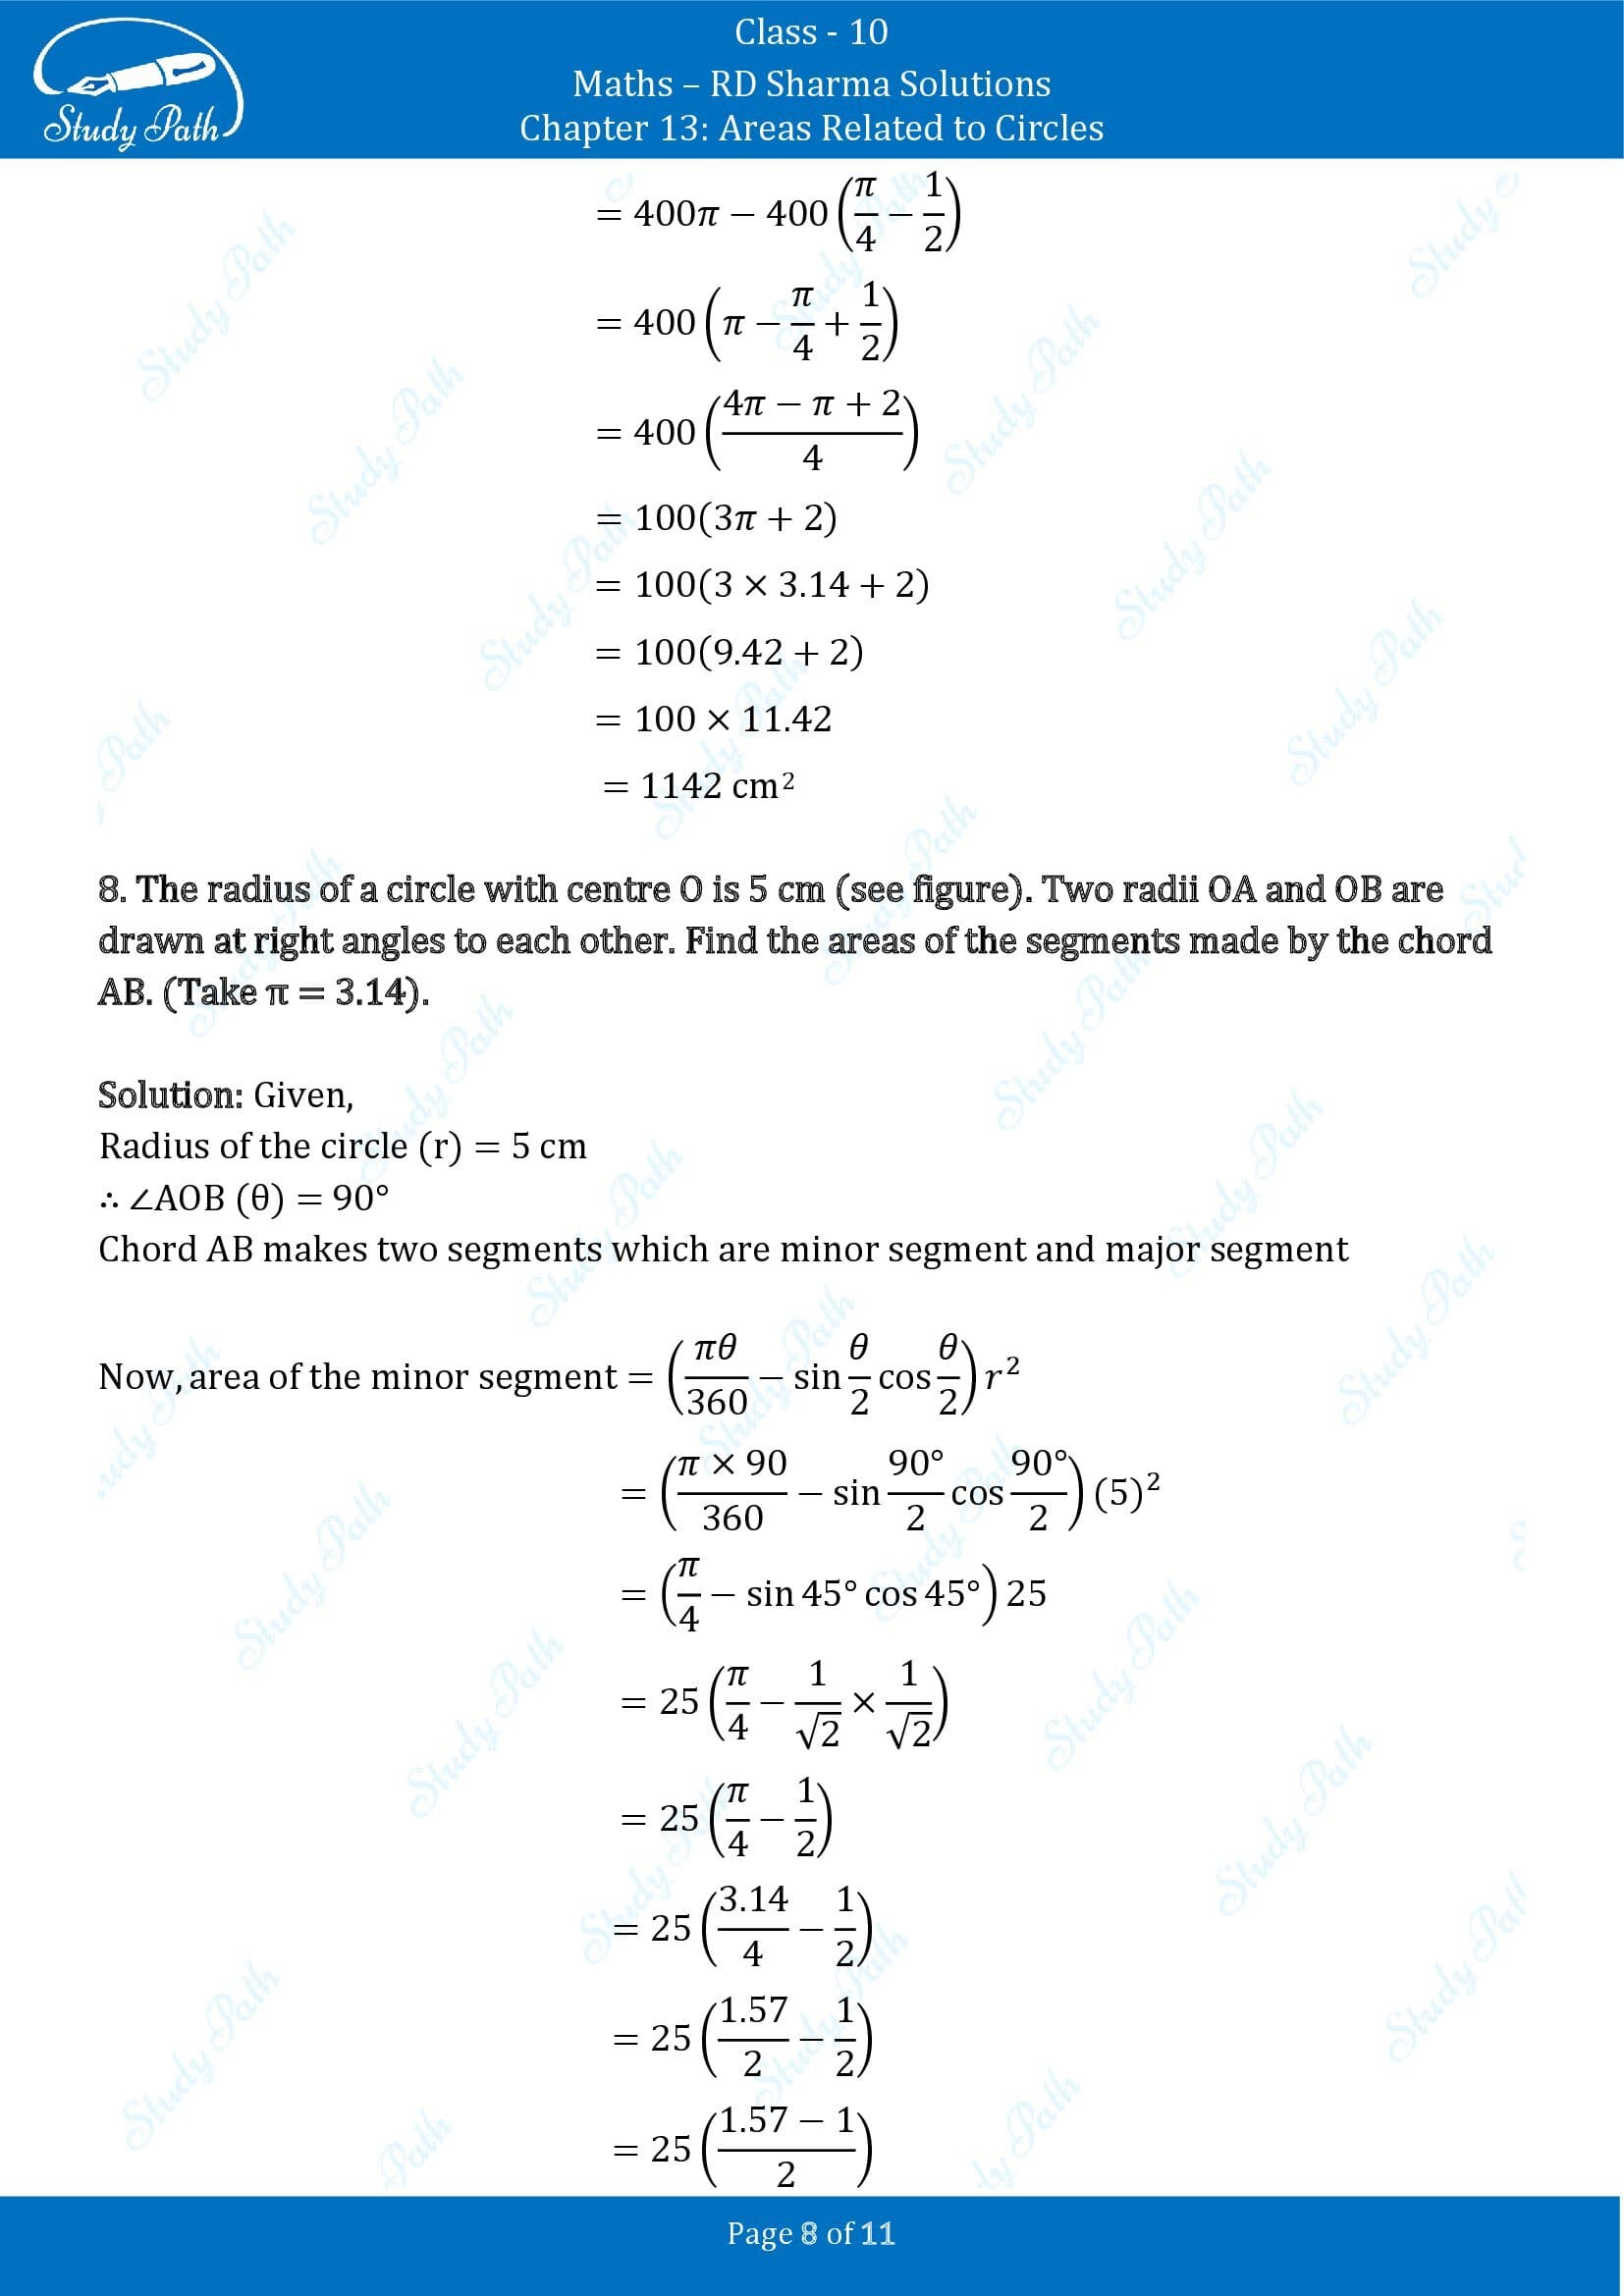 RD Sharma Solutions Class 10 Chapter 13 Areas Related to Circles Exercise 13.3 00008